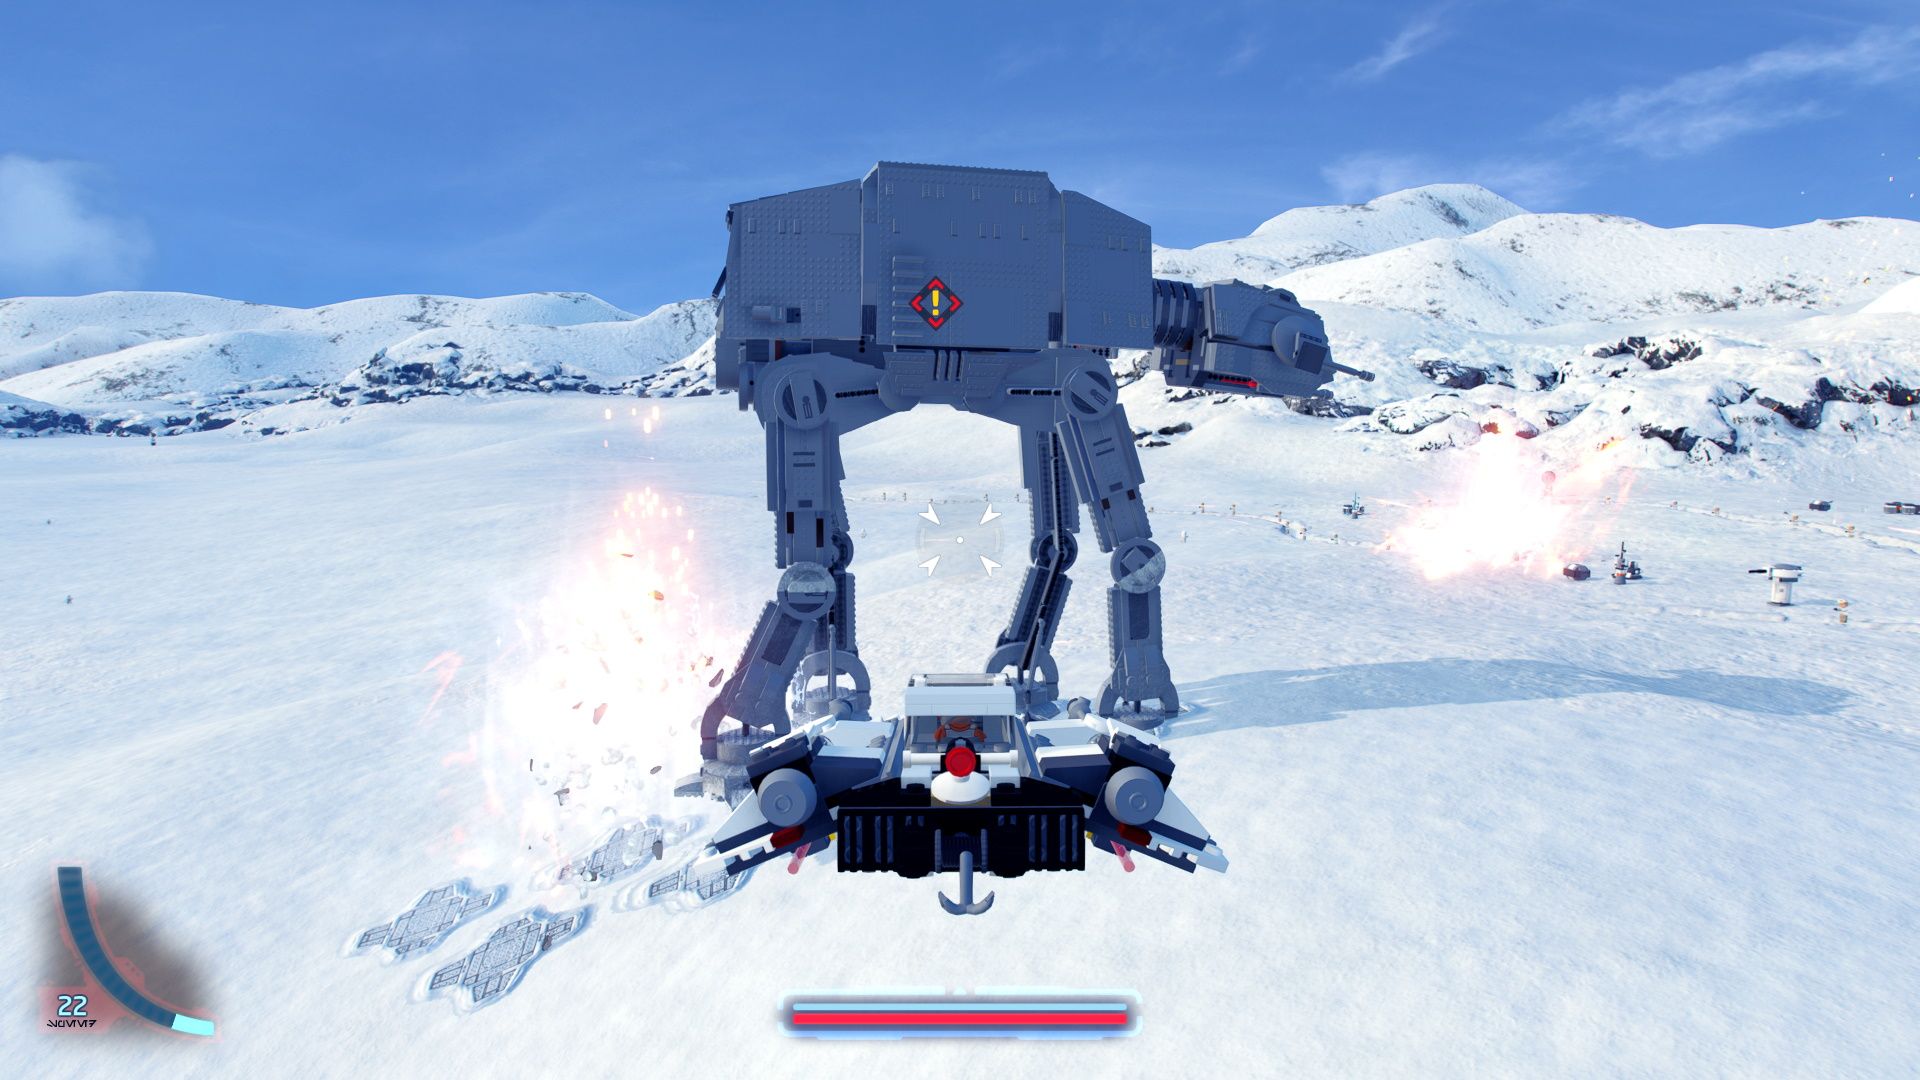 How To Complete All The Empire Strikes Back Challenges in Lego